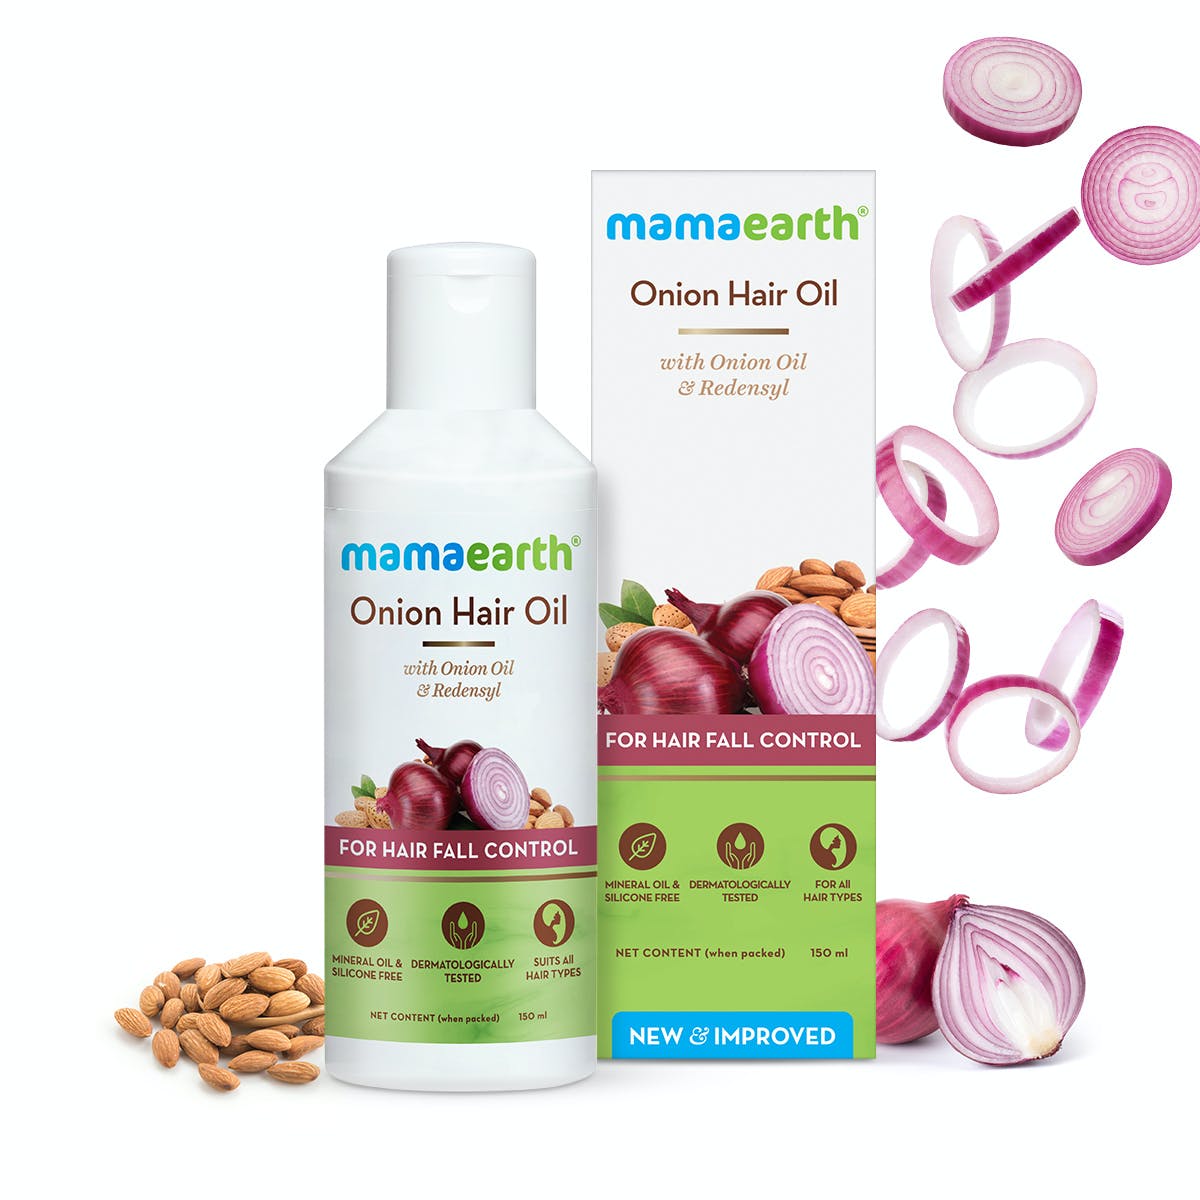 mamaearth’
Onion Hair Oil

with Onion Oil
&amp; Redensyl

 

'
mamaearth’
Onion Hair Oil -

with Onion Oil
&amp; Redensyl

NEW &amp; IMPROVED